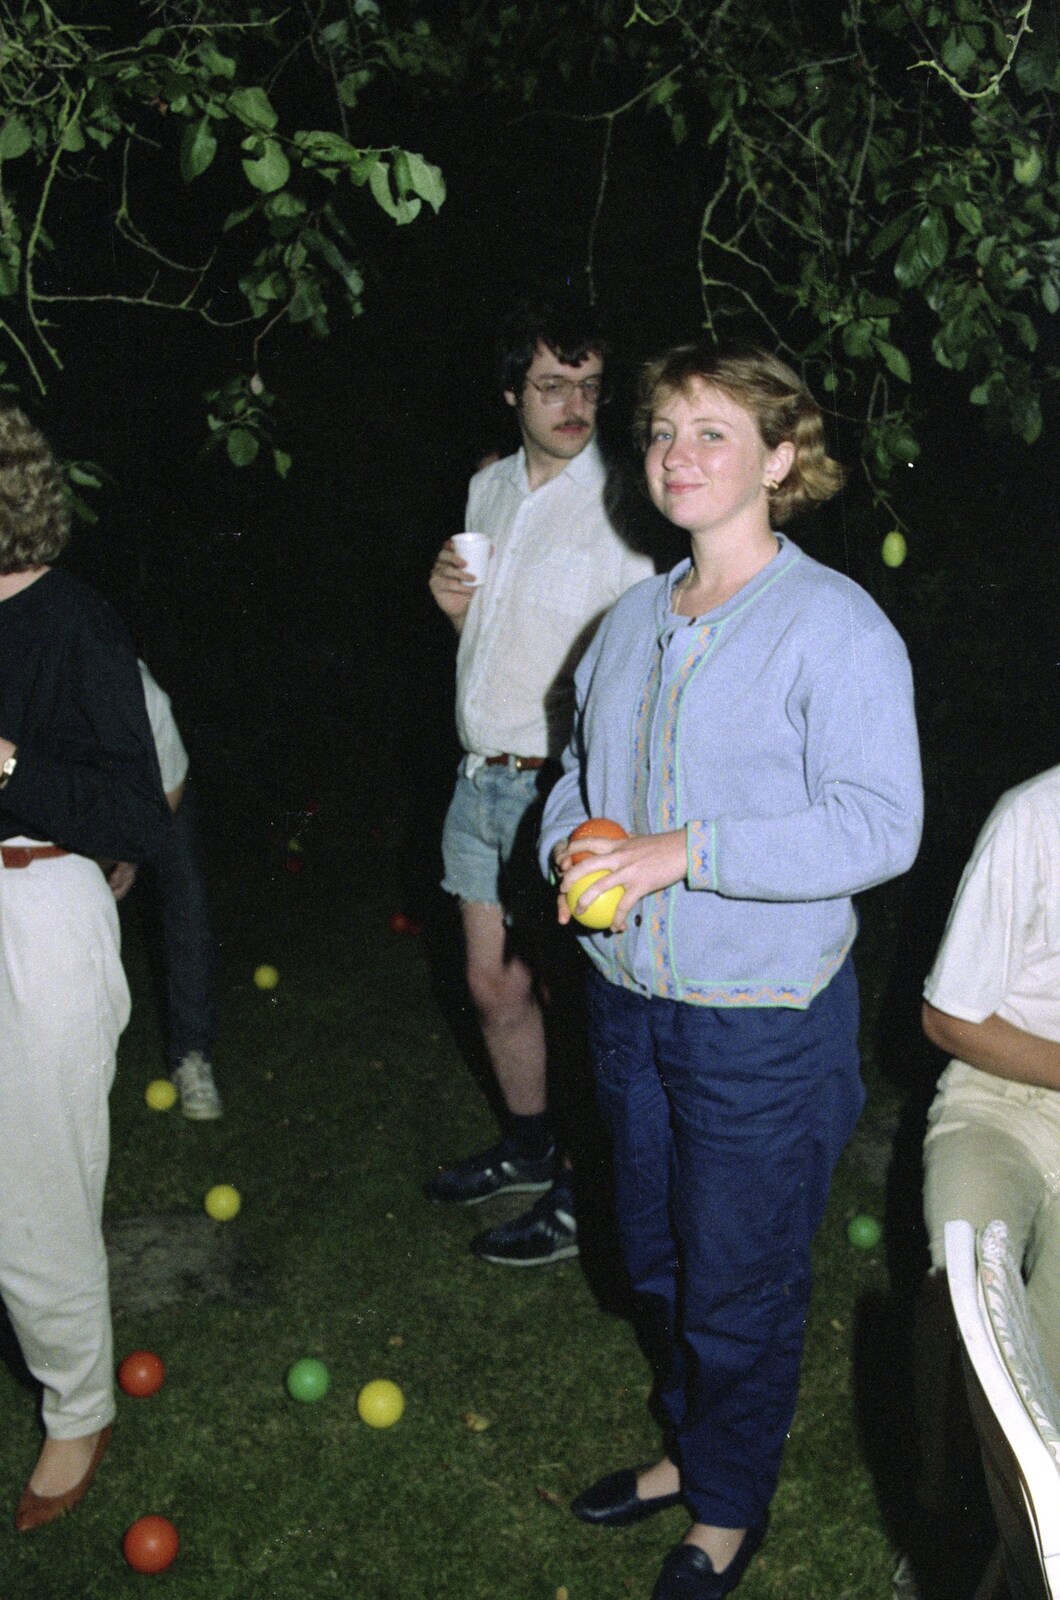 Balls in the garden from Chris and Phil's Party, Hordle, Hampshire - 6th September 1989